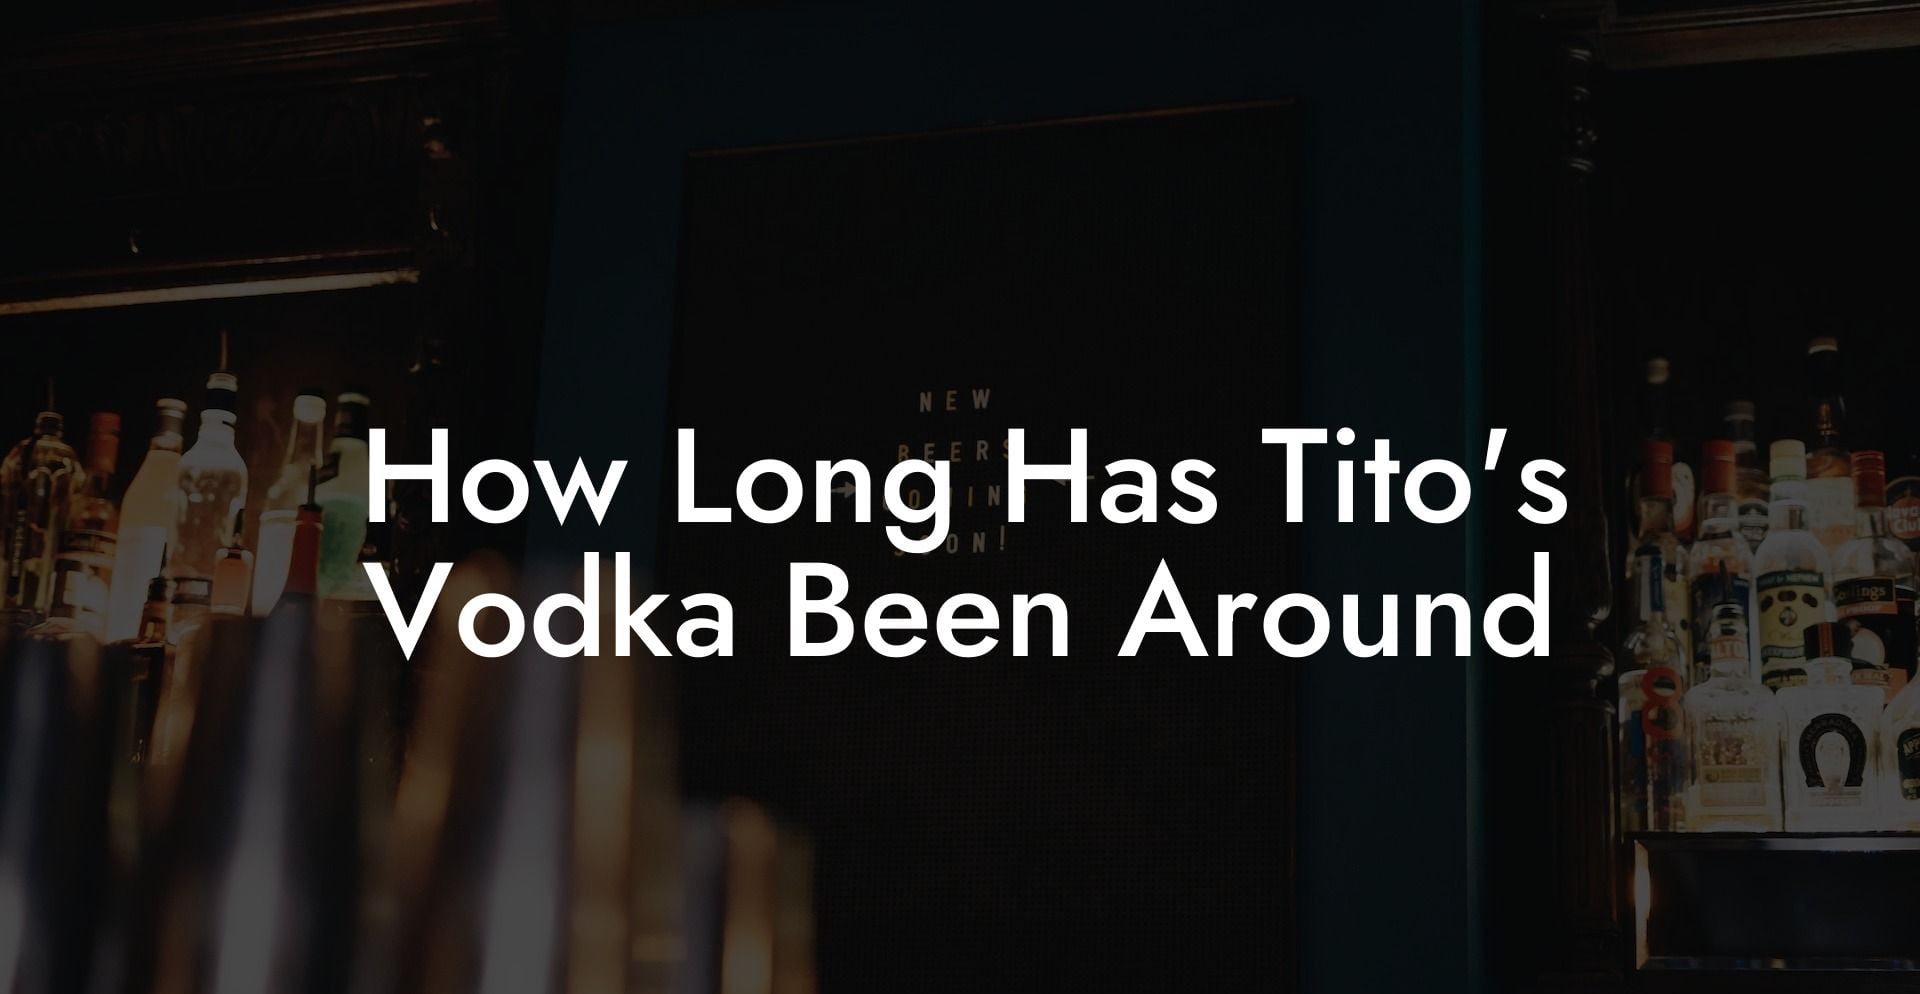 How Long Has Tito's Vodka Been Around